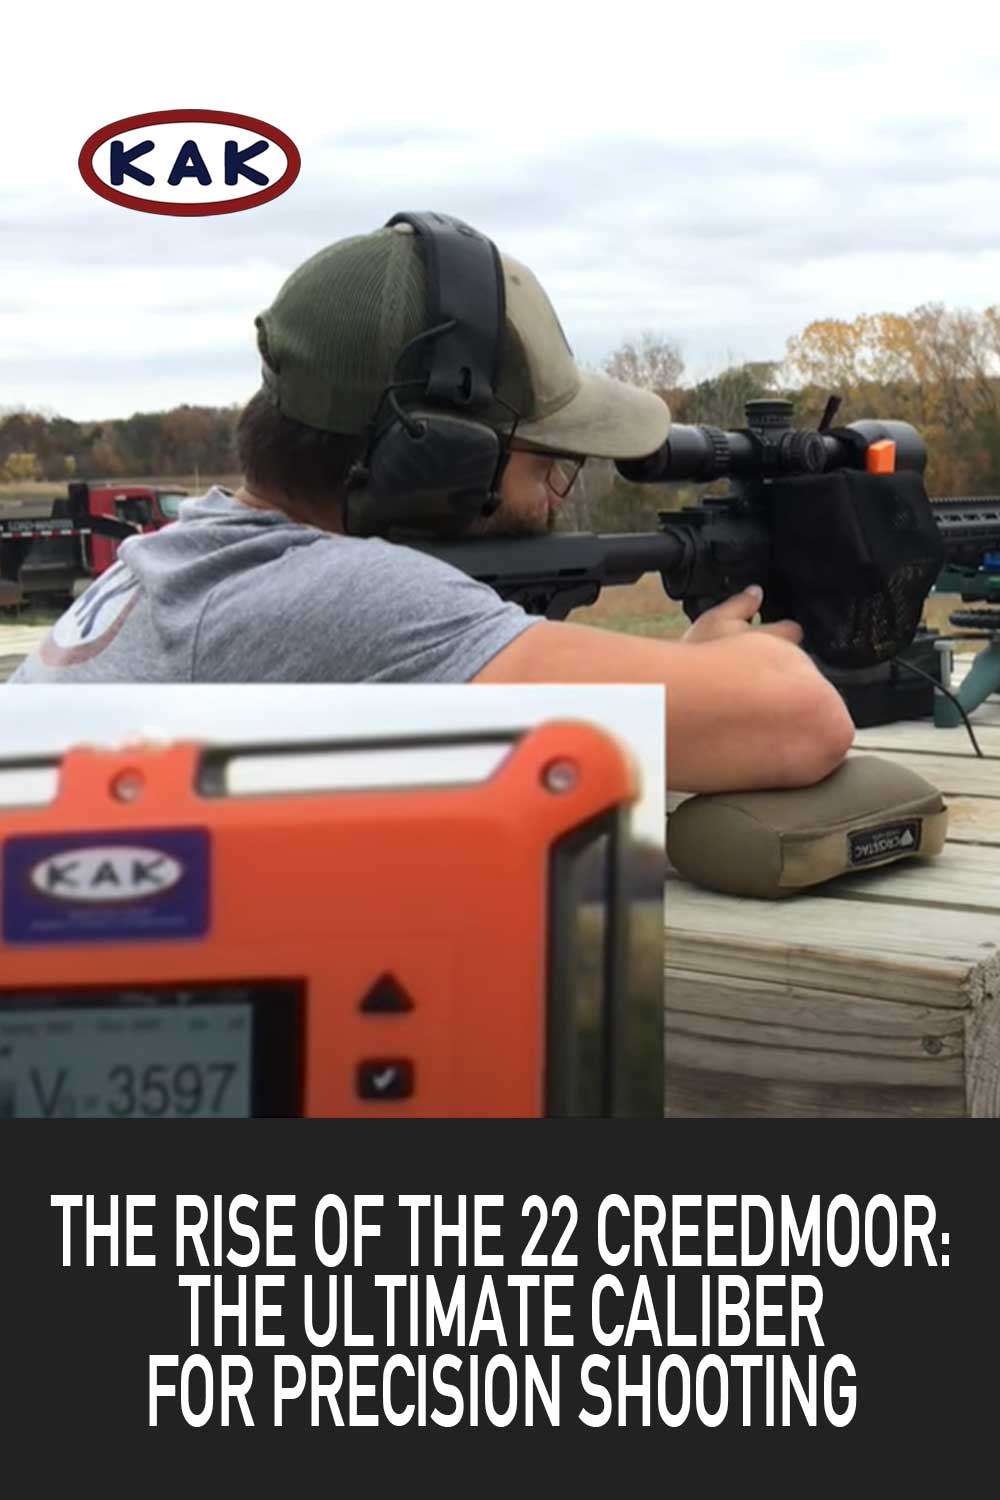 The Rise of the 22 Creedmoor: The Ultimate Caliber for Precision Shooting